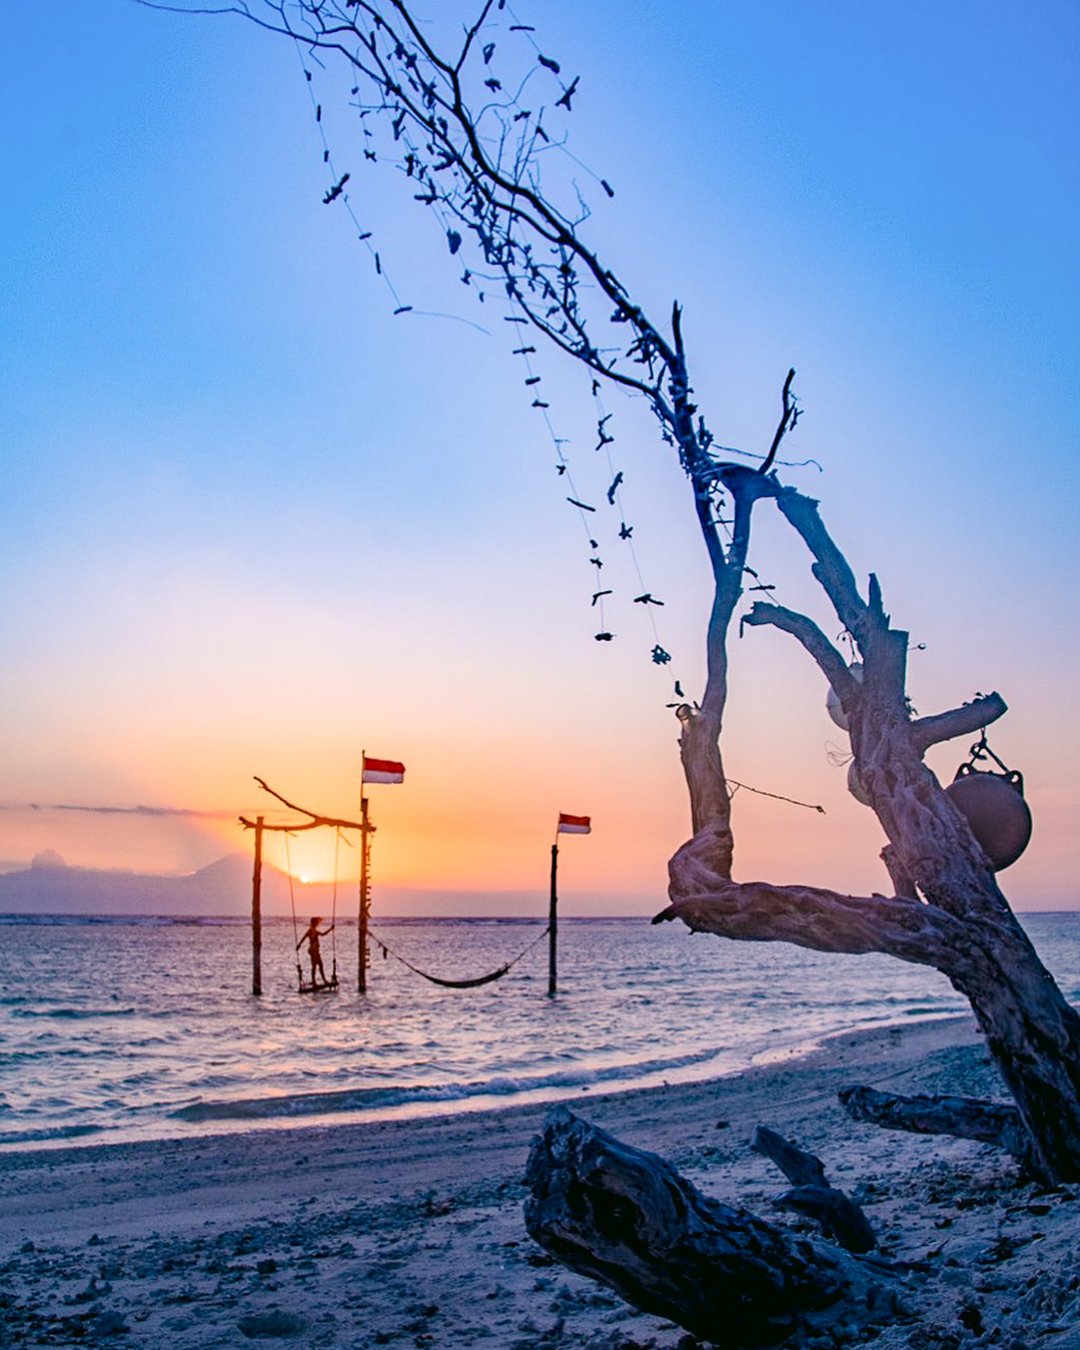 Gili Trawangan Is One Of The Best Places To Witness Those Sunsets